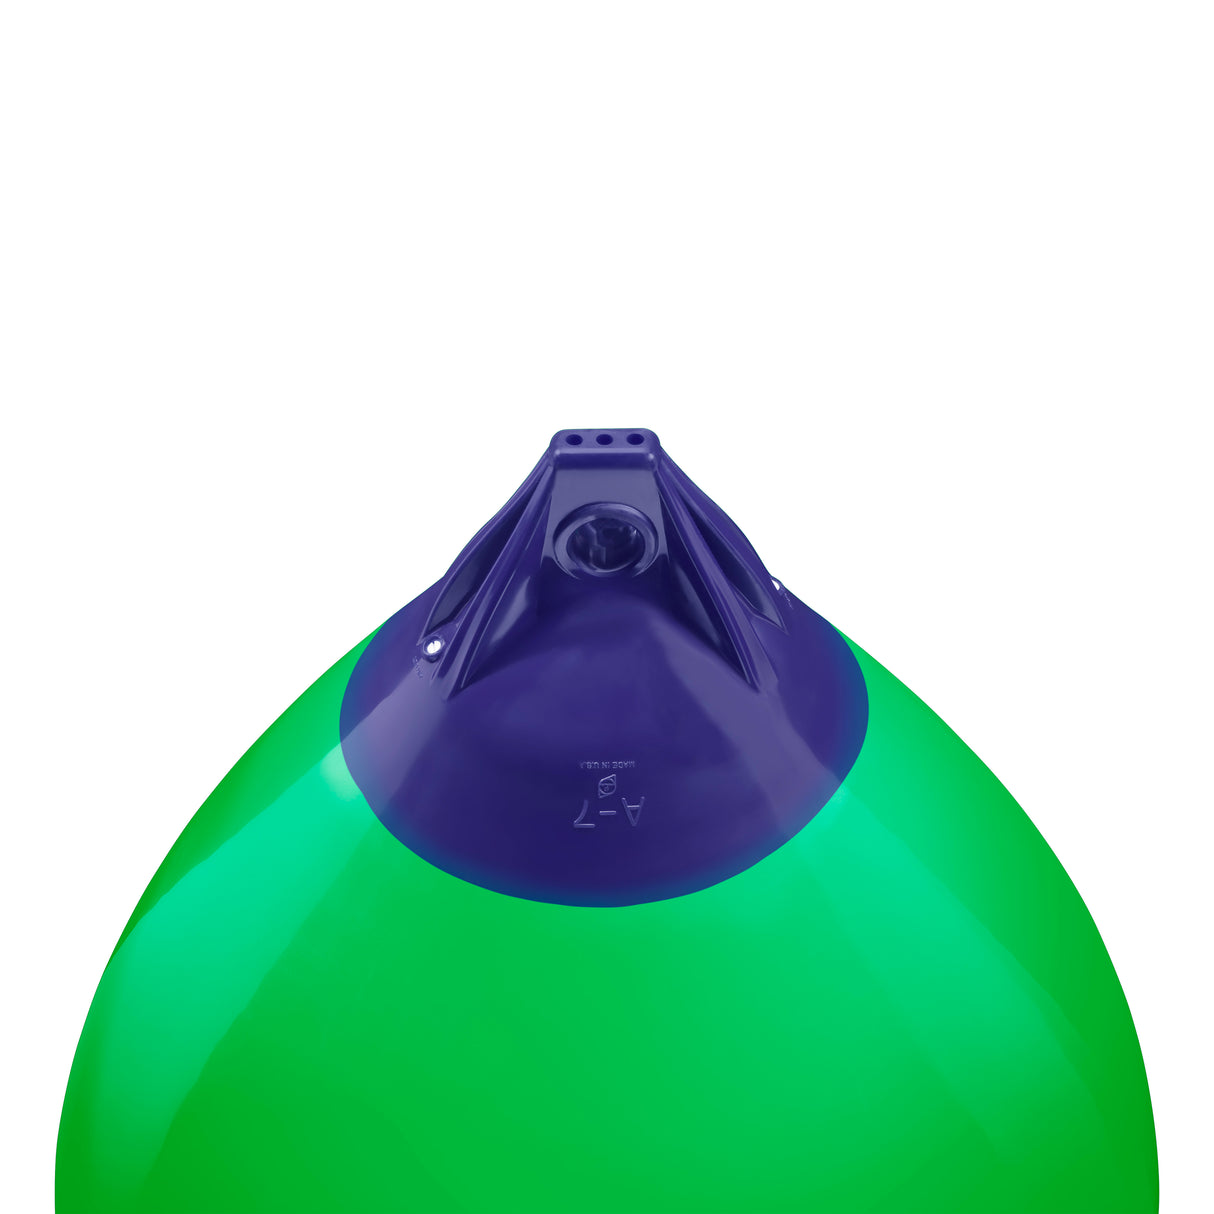 Green inflatable buoy, Polyform A-7 angled shot